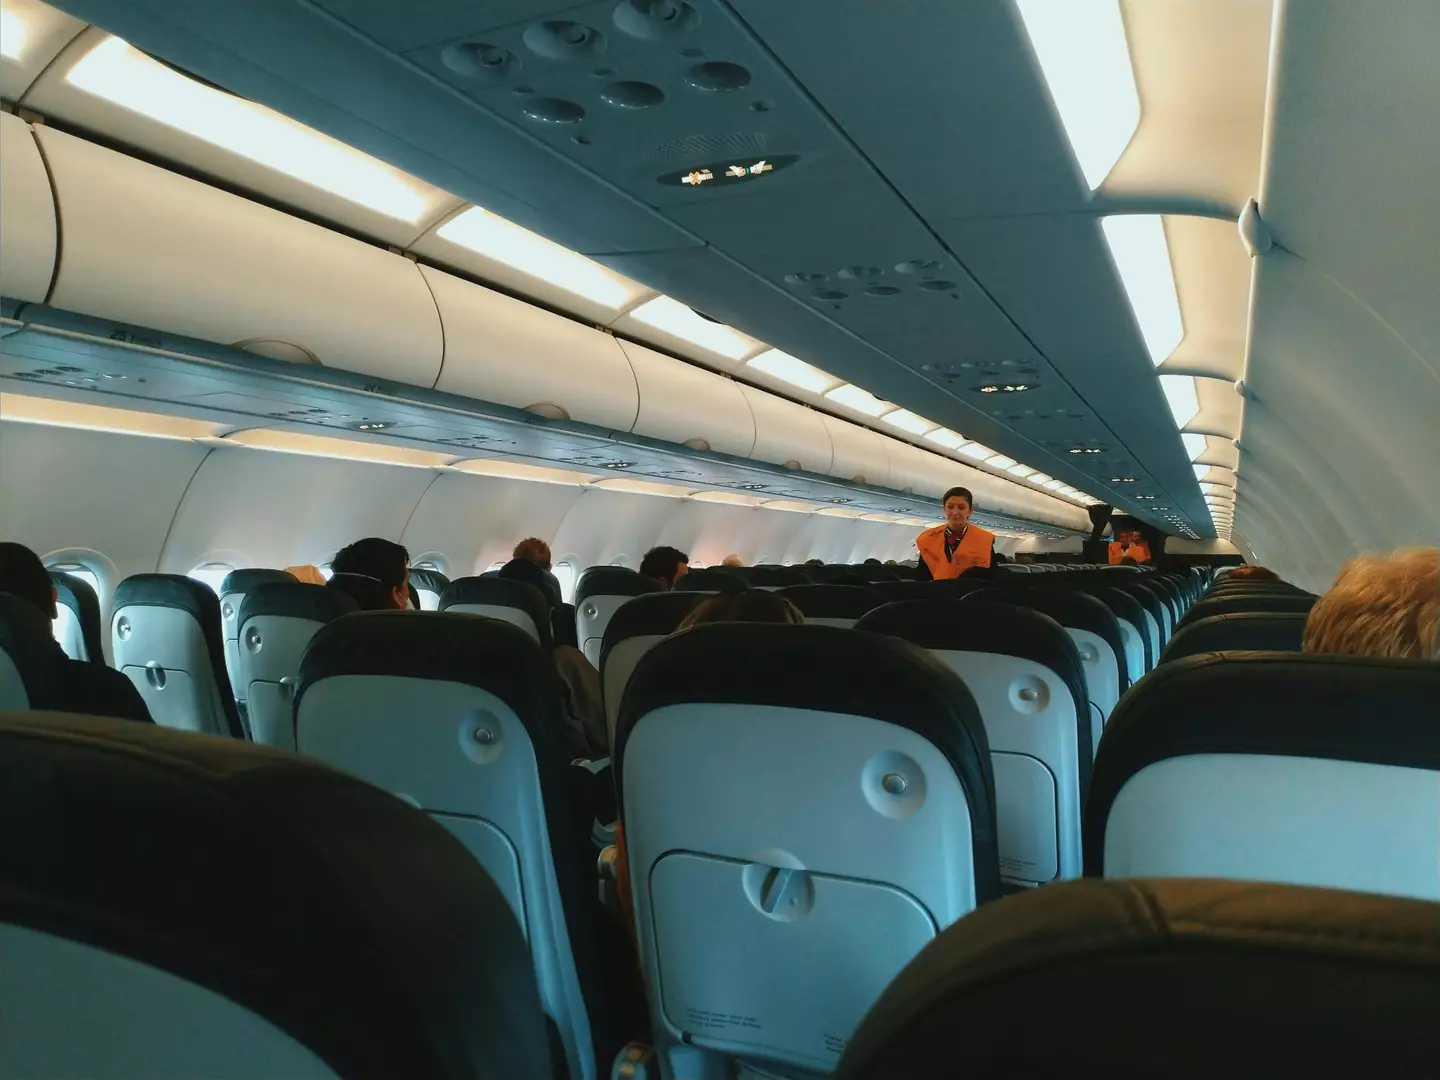 What would you do if you could choose your seat on a near-empty plane?